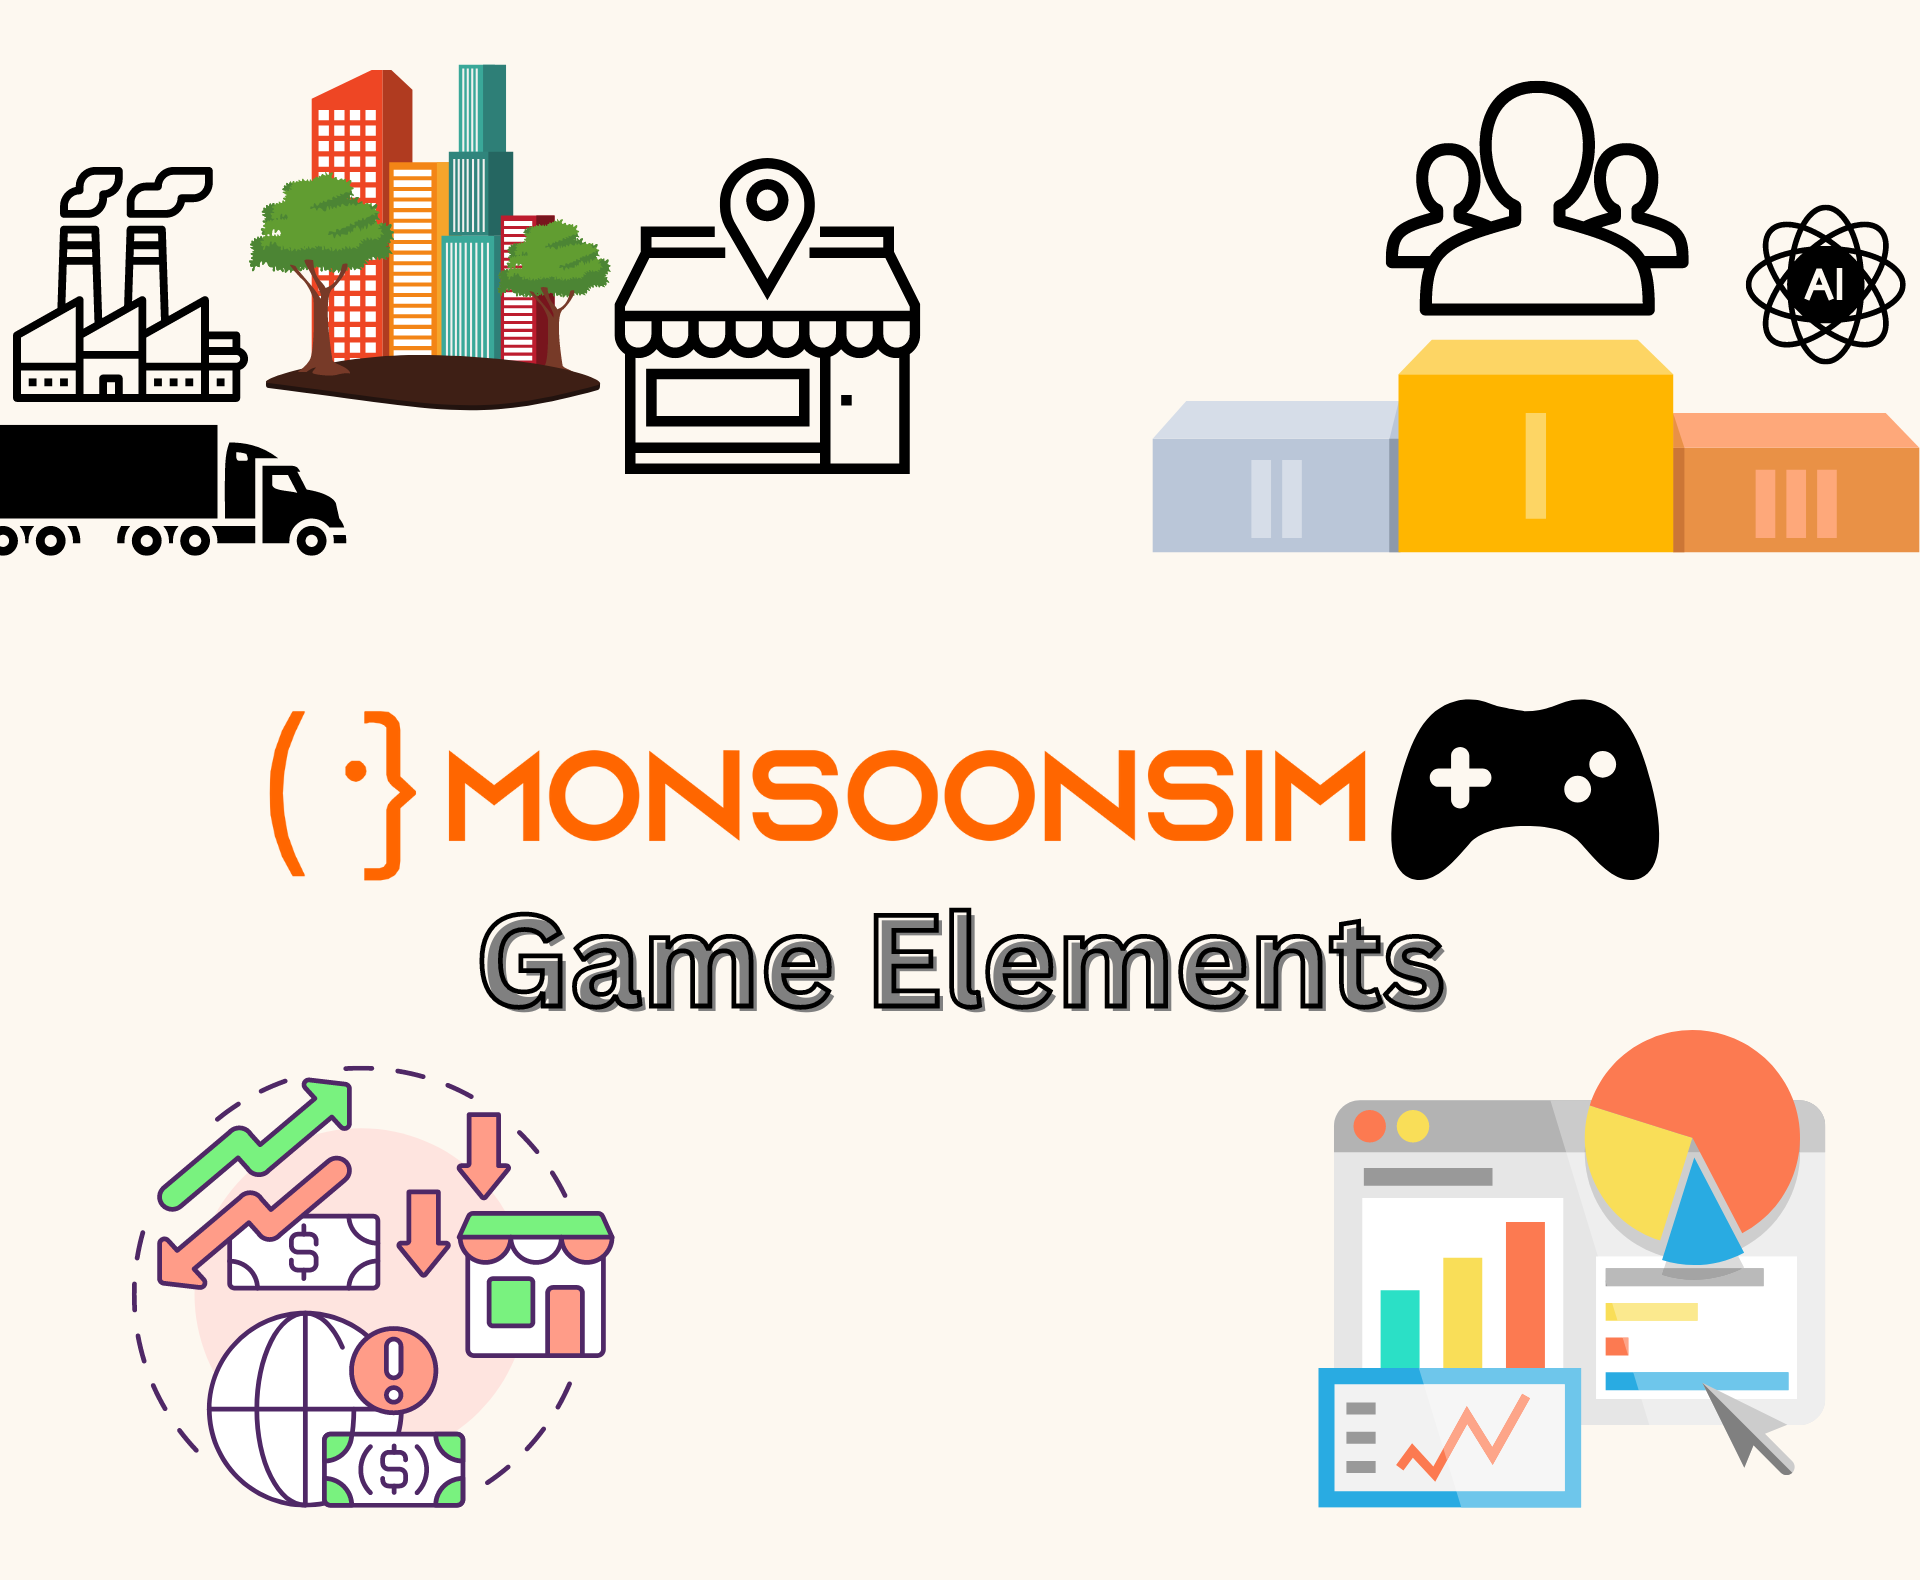 GPT The image displays various colorful icons representing the different game elements within the MonsoonSIM platform. At the top, there are icons for industrial buildings, a store, a warehouse, and a group of people, suggesting modules related to production, retail, logistics, and teamwork. Below them is the MonsoonSIM logo, highlighted to emphasize the brand. At the bottom left, thereâs a circle containing icons for finance and global business, indicating economic and international trade modules. On the bottom right, thereâs a computer screen with graphs and charts, signifying data analysis and business intelligence features. The layout conveys a comprehensive suite of business simulation components offered by MonsoonSIM for educational purposes.